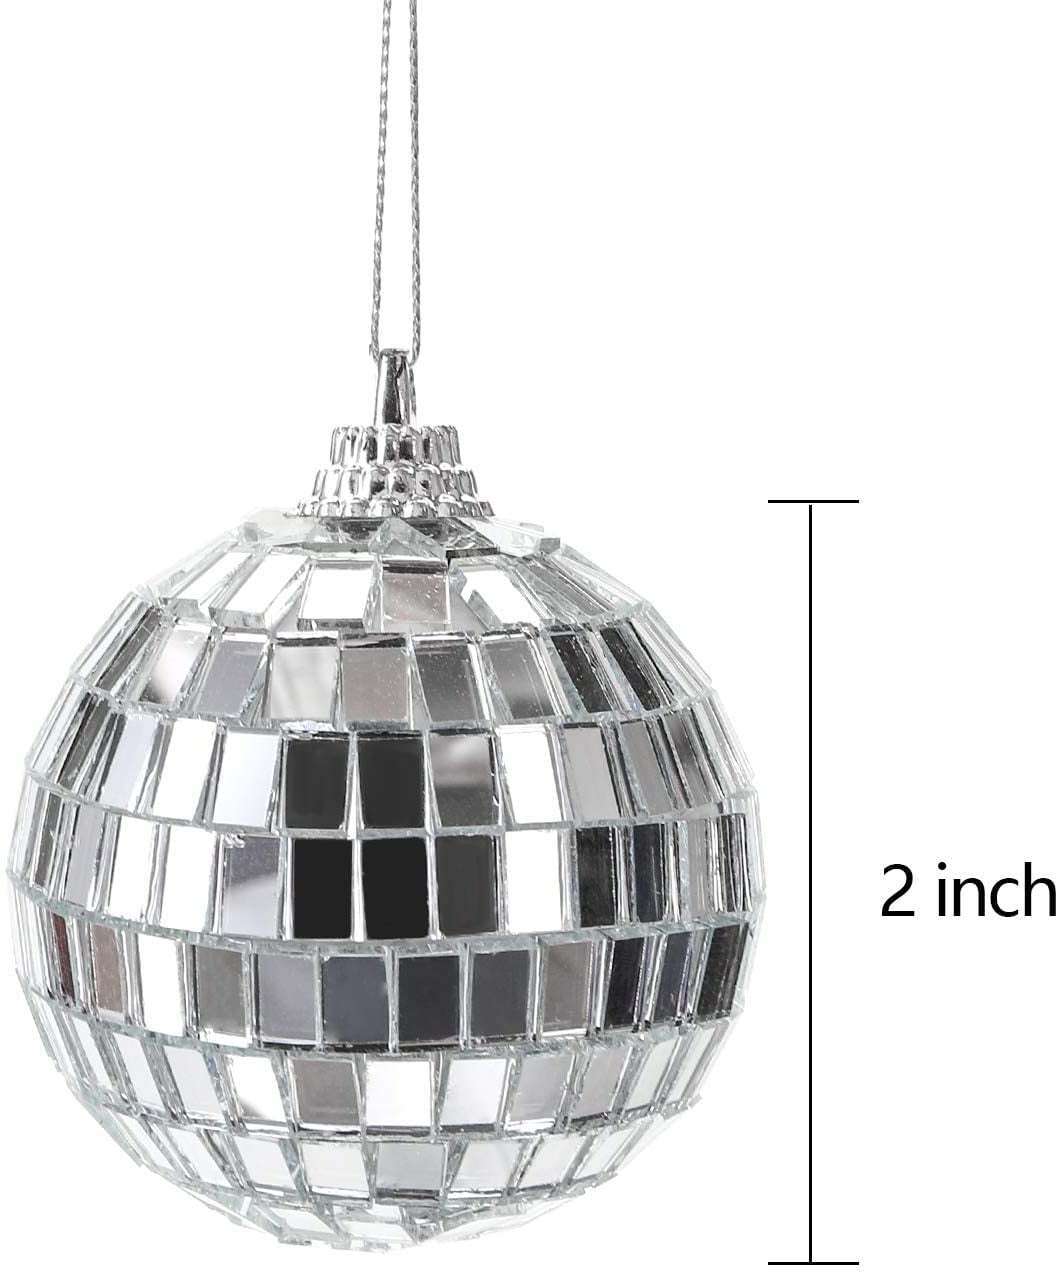 Suwimut 9 Pieces Mirror Disco Ball Weddings 4 Inches Silver Hanging Ball for Party Birthdays Game Accessories Home Decorations Stage Props 